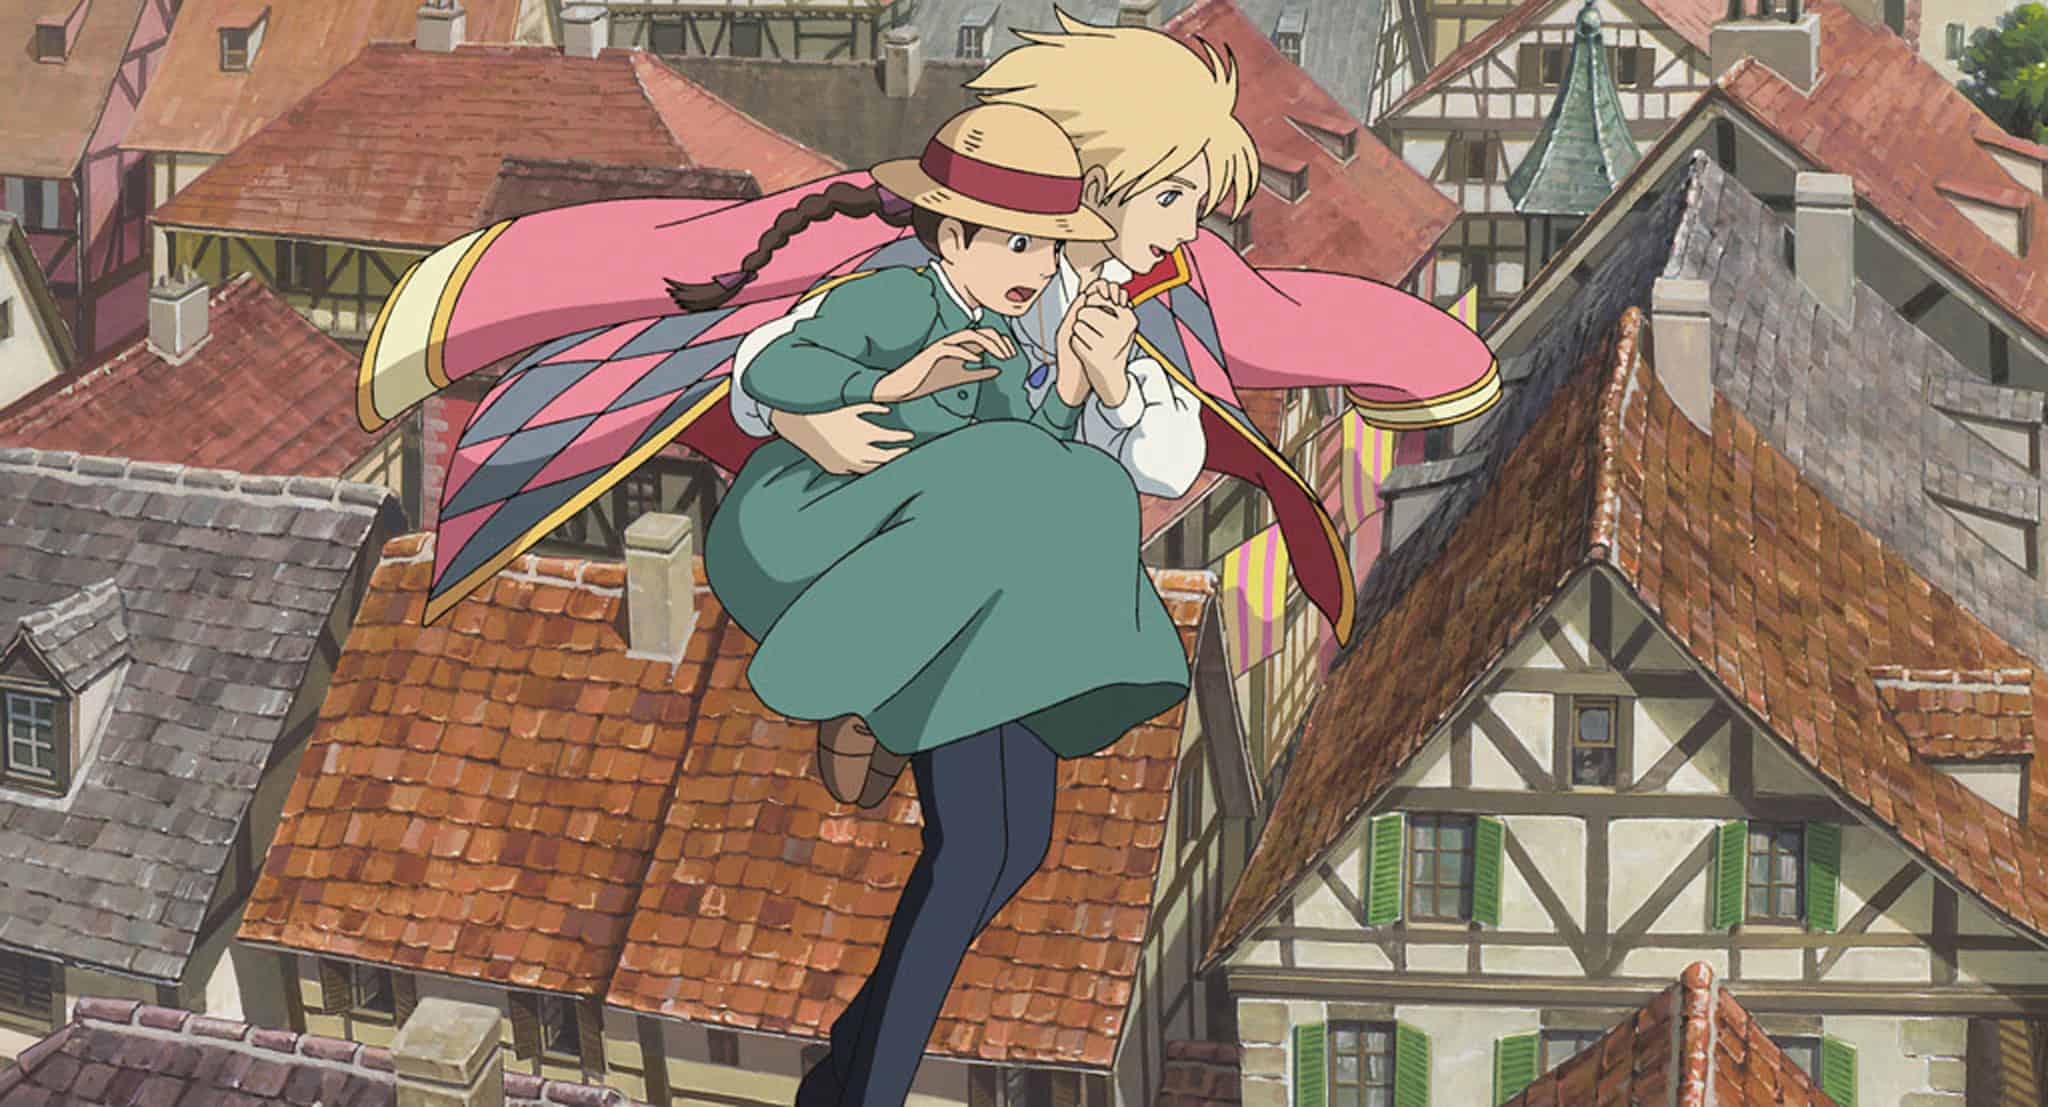 An animated girl and a wizard flying over a town in this image from Studio Ghibli.